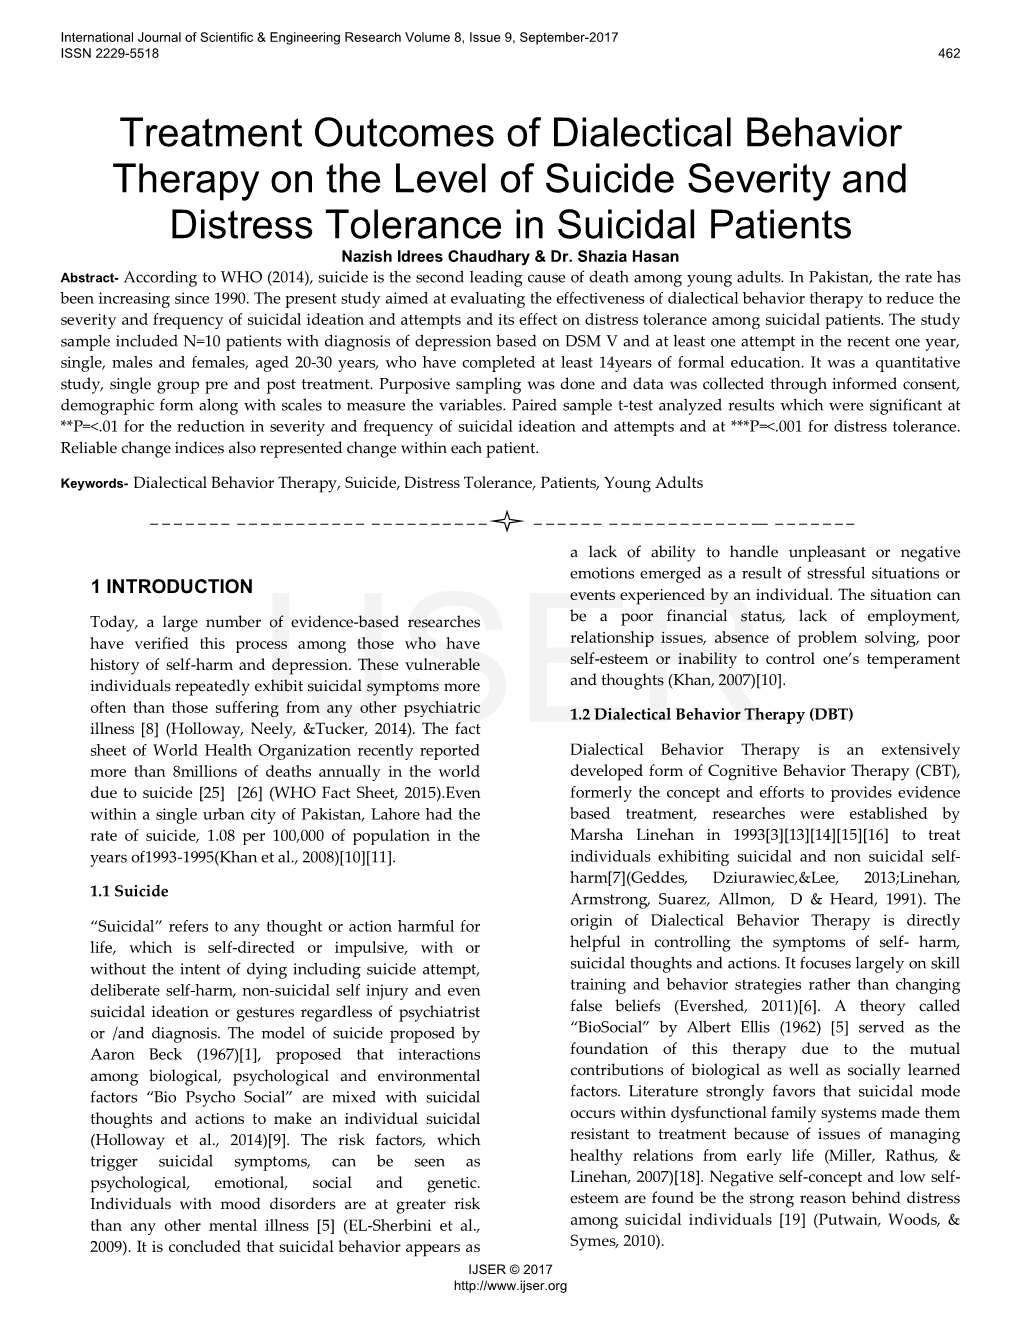 Treatment Outcomes of Dialectical Behavior Therapy on the Level of Suicide Severity and Distress Tolerance in Suicidal Patients Nazish Idrees Chaudhary & Dr